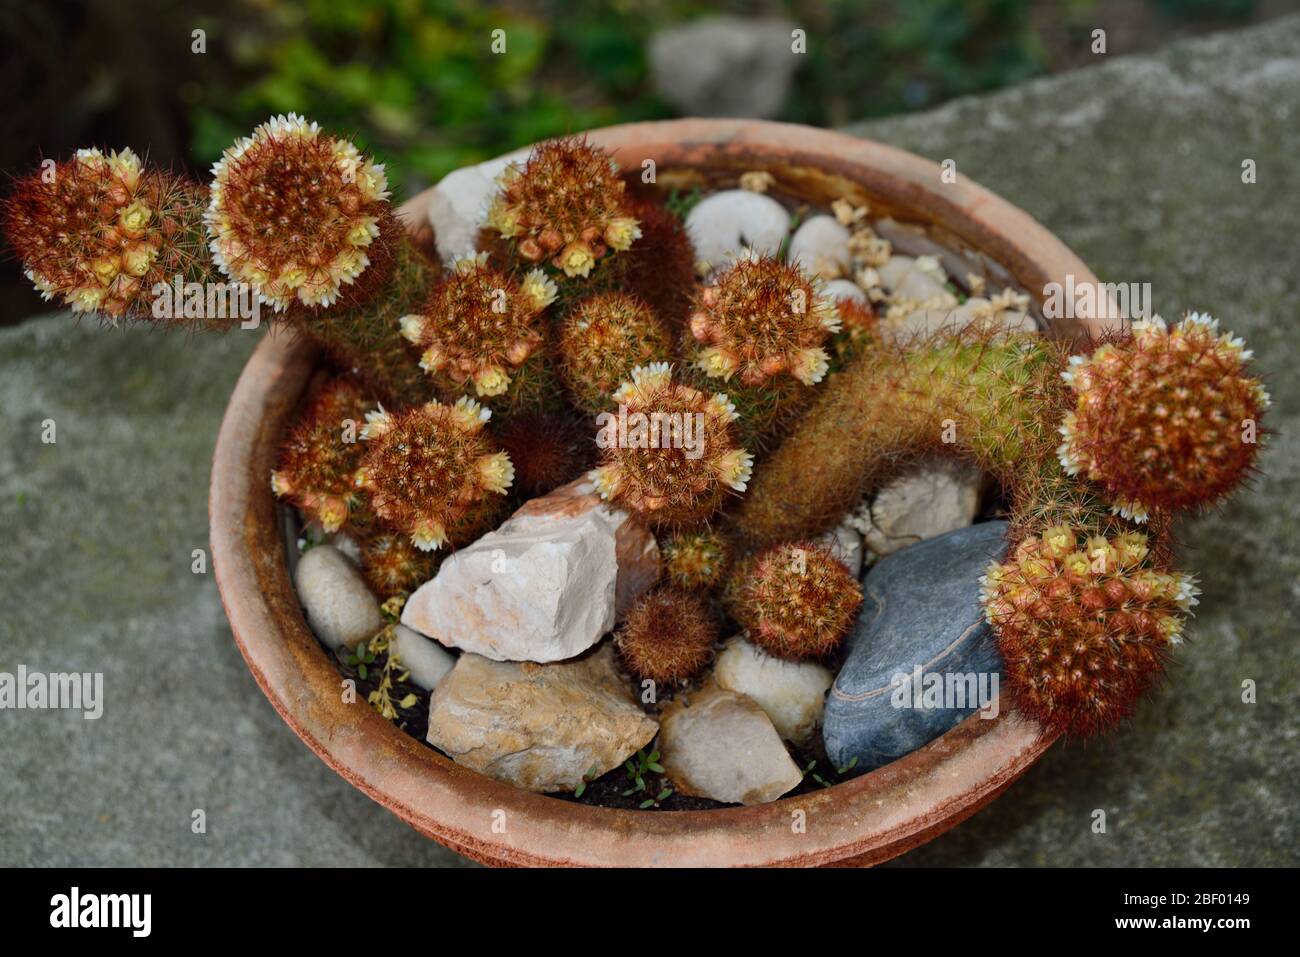 A gold lace cactus in flowerpot Stock Photo